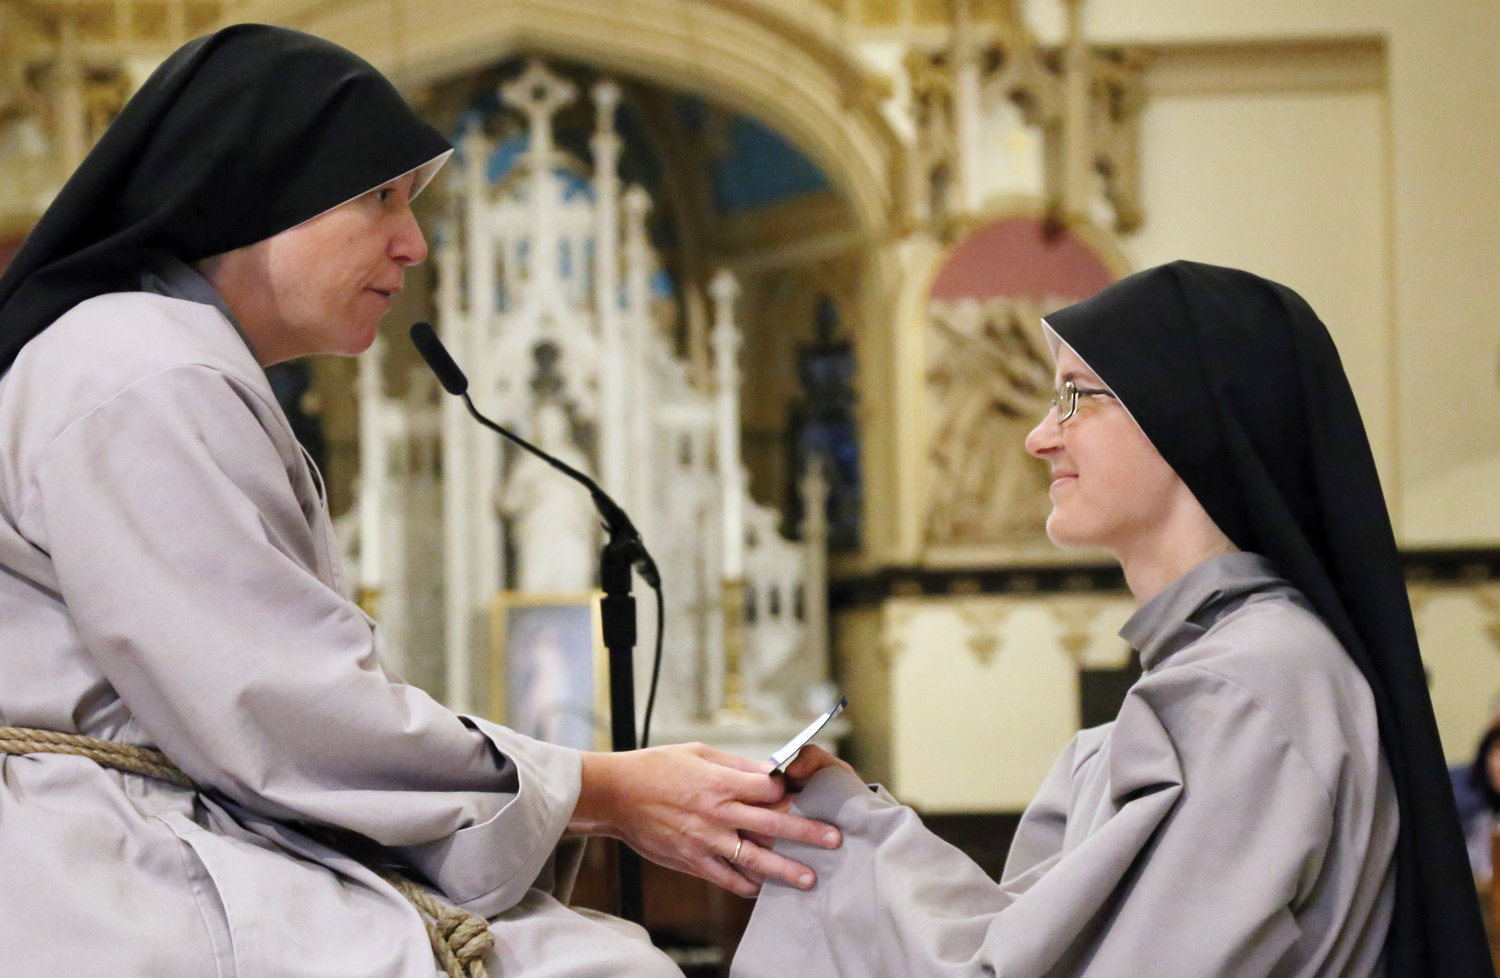 Mother Clare Matthiass, C.F.R., general servant of the Franciscan Sisters of the Renewal, receives the final vows of Sister Josephine Marie of Mercy, C.F.R., at Our Lady of Good Counsel Church in Manhattan.